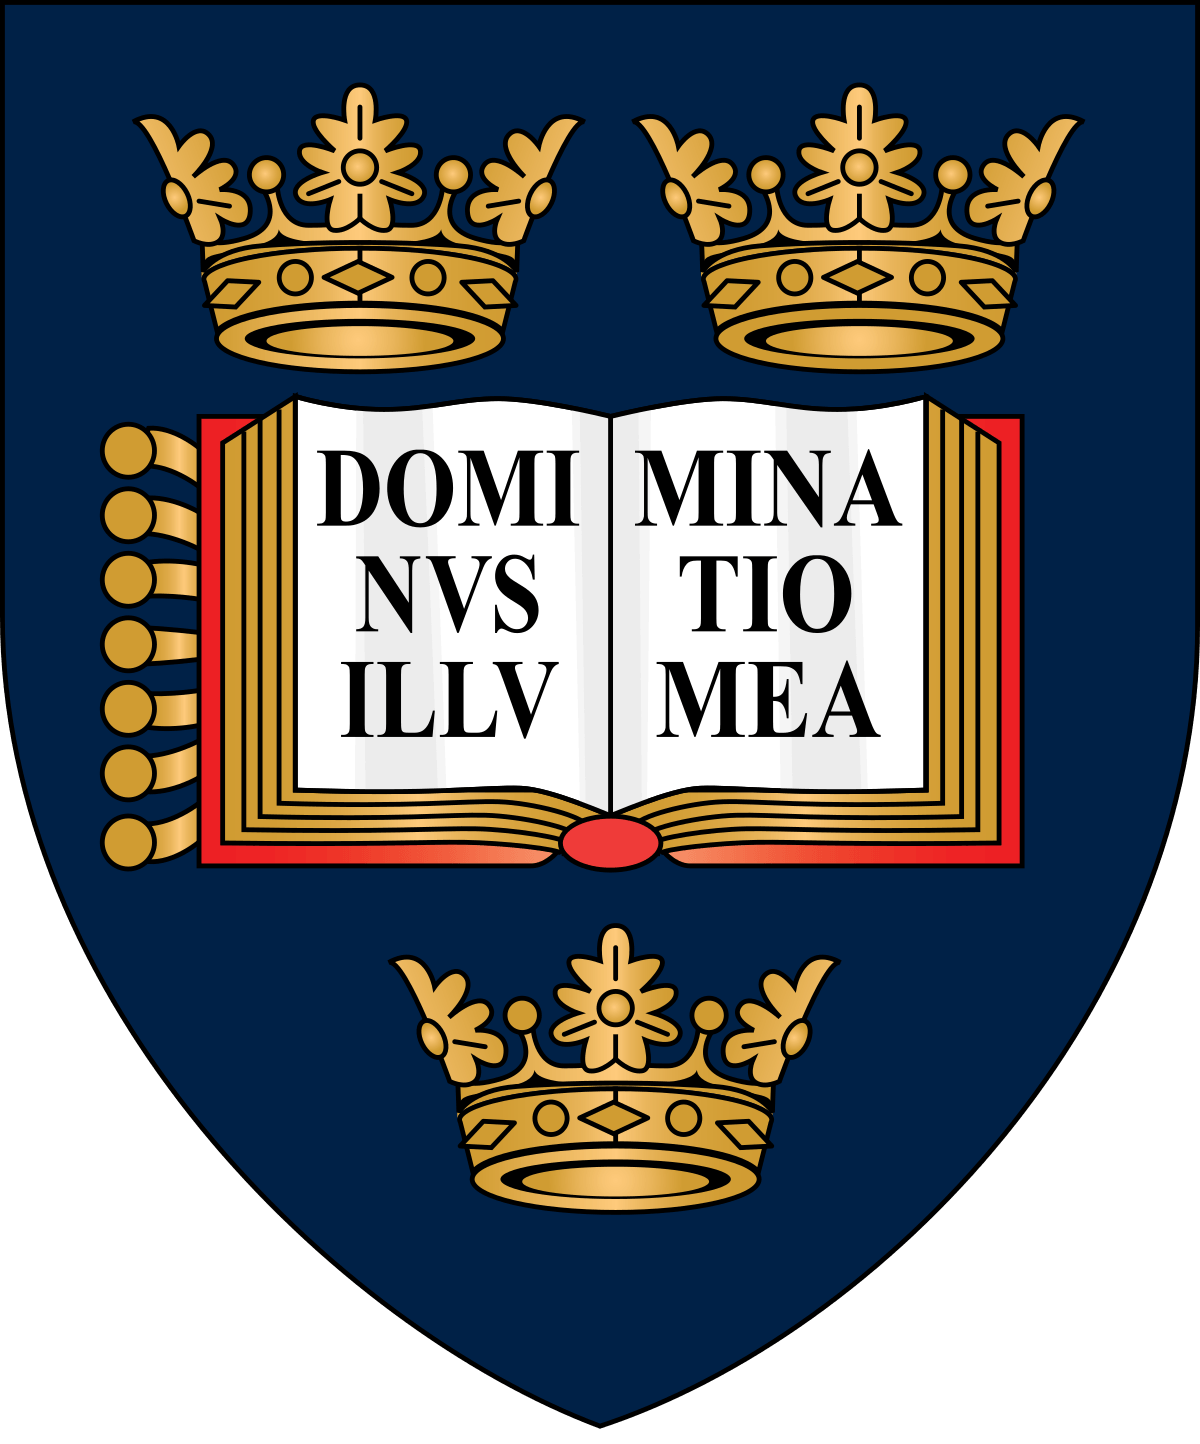 Oxford Logo - Coat of arms of the University of Oxford